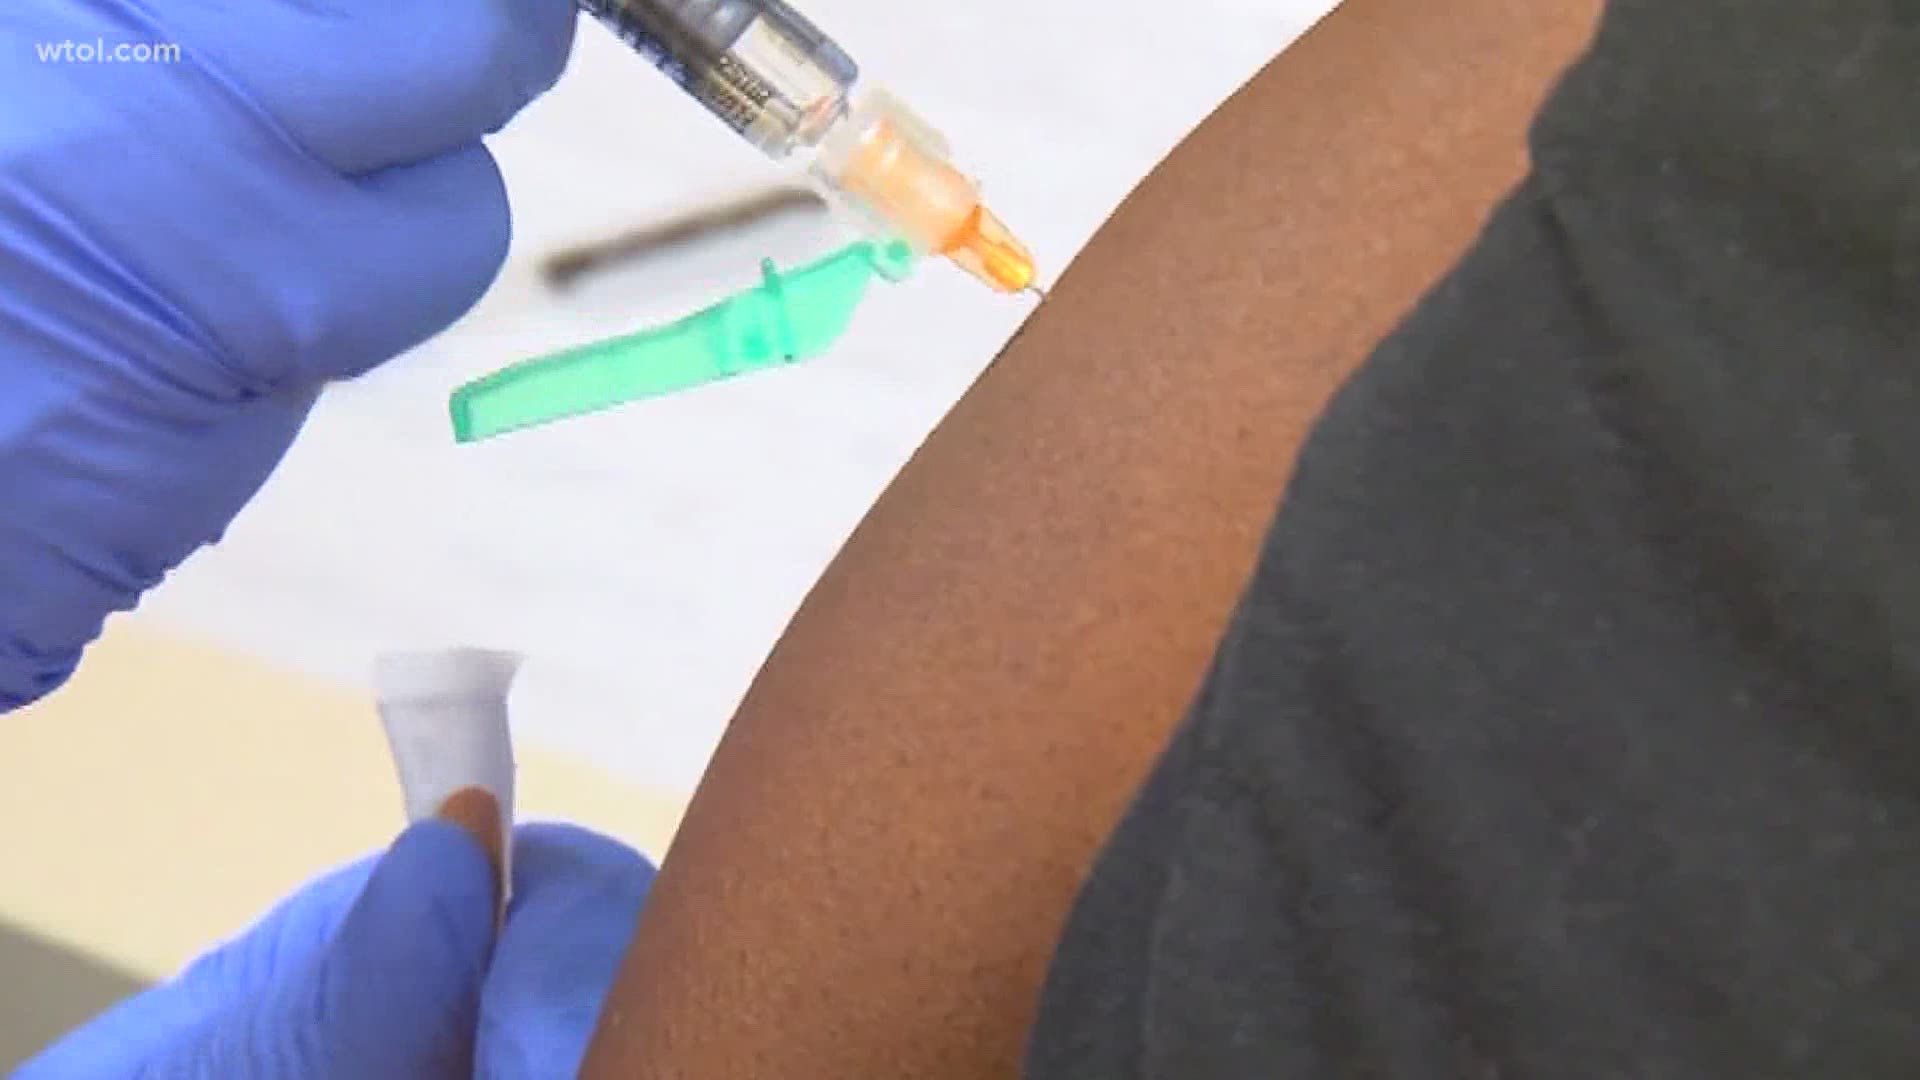 Health experts are strongly encouraging students to get their annual flu shot this year to free up resources and services for treating COVID-19 patients.